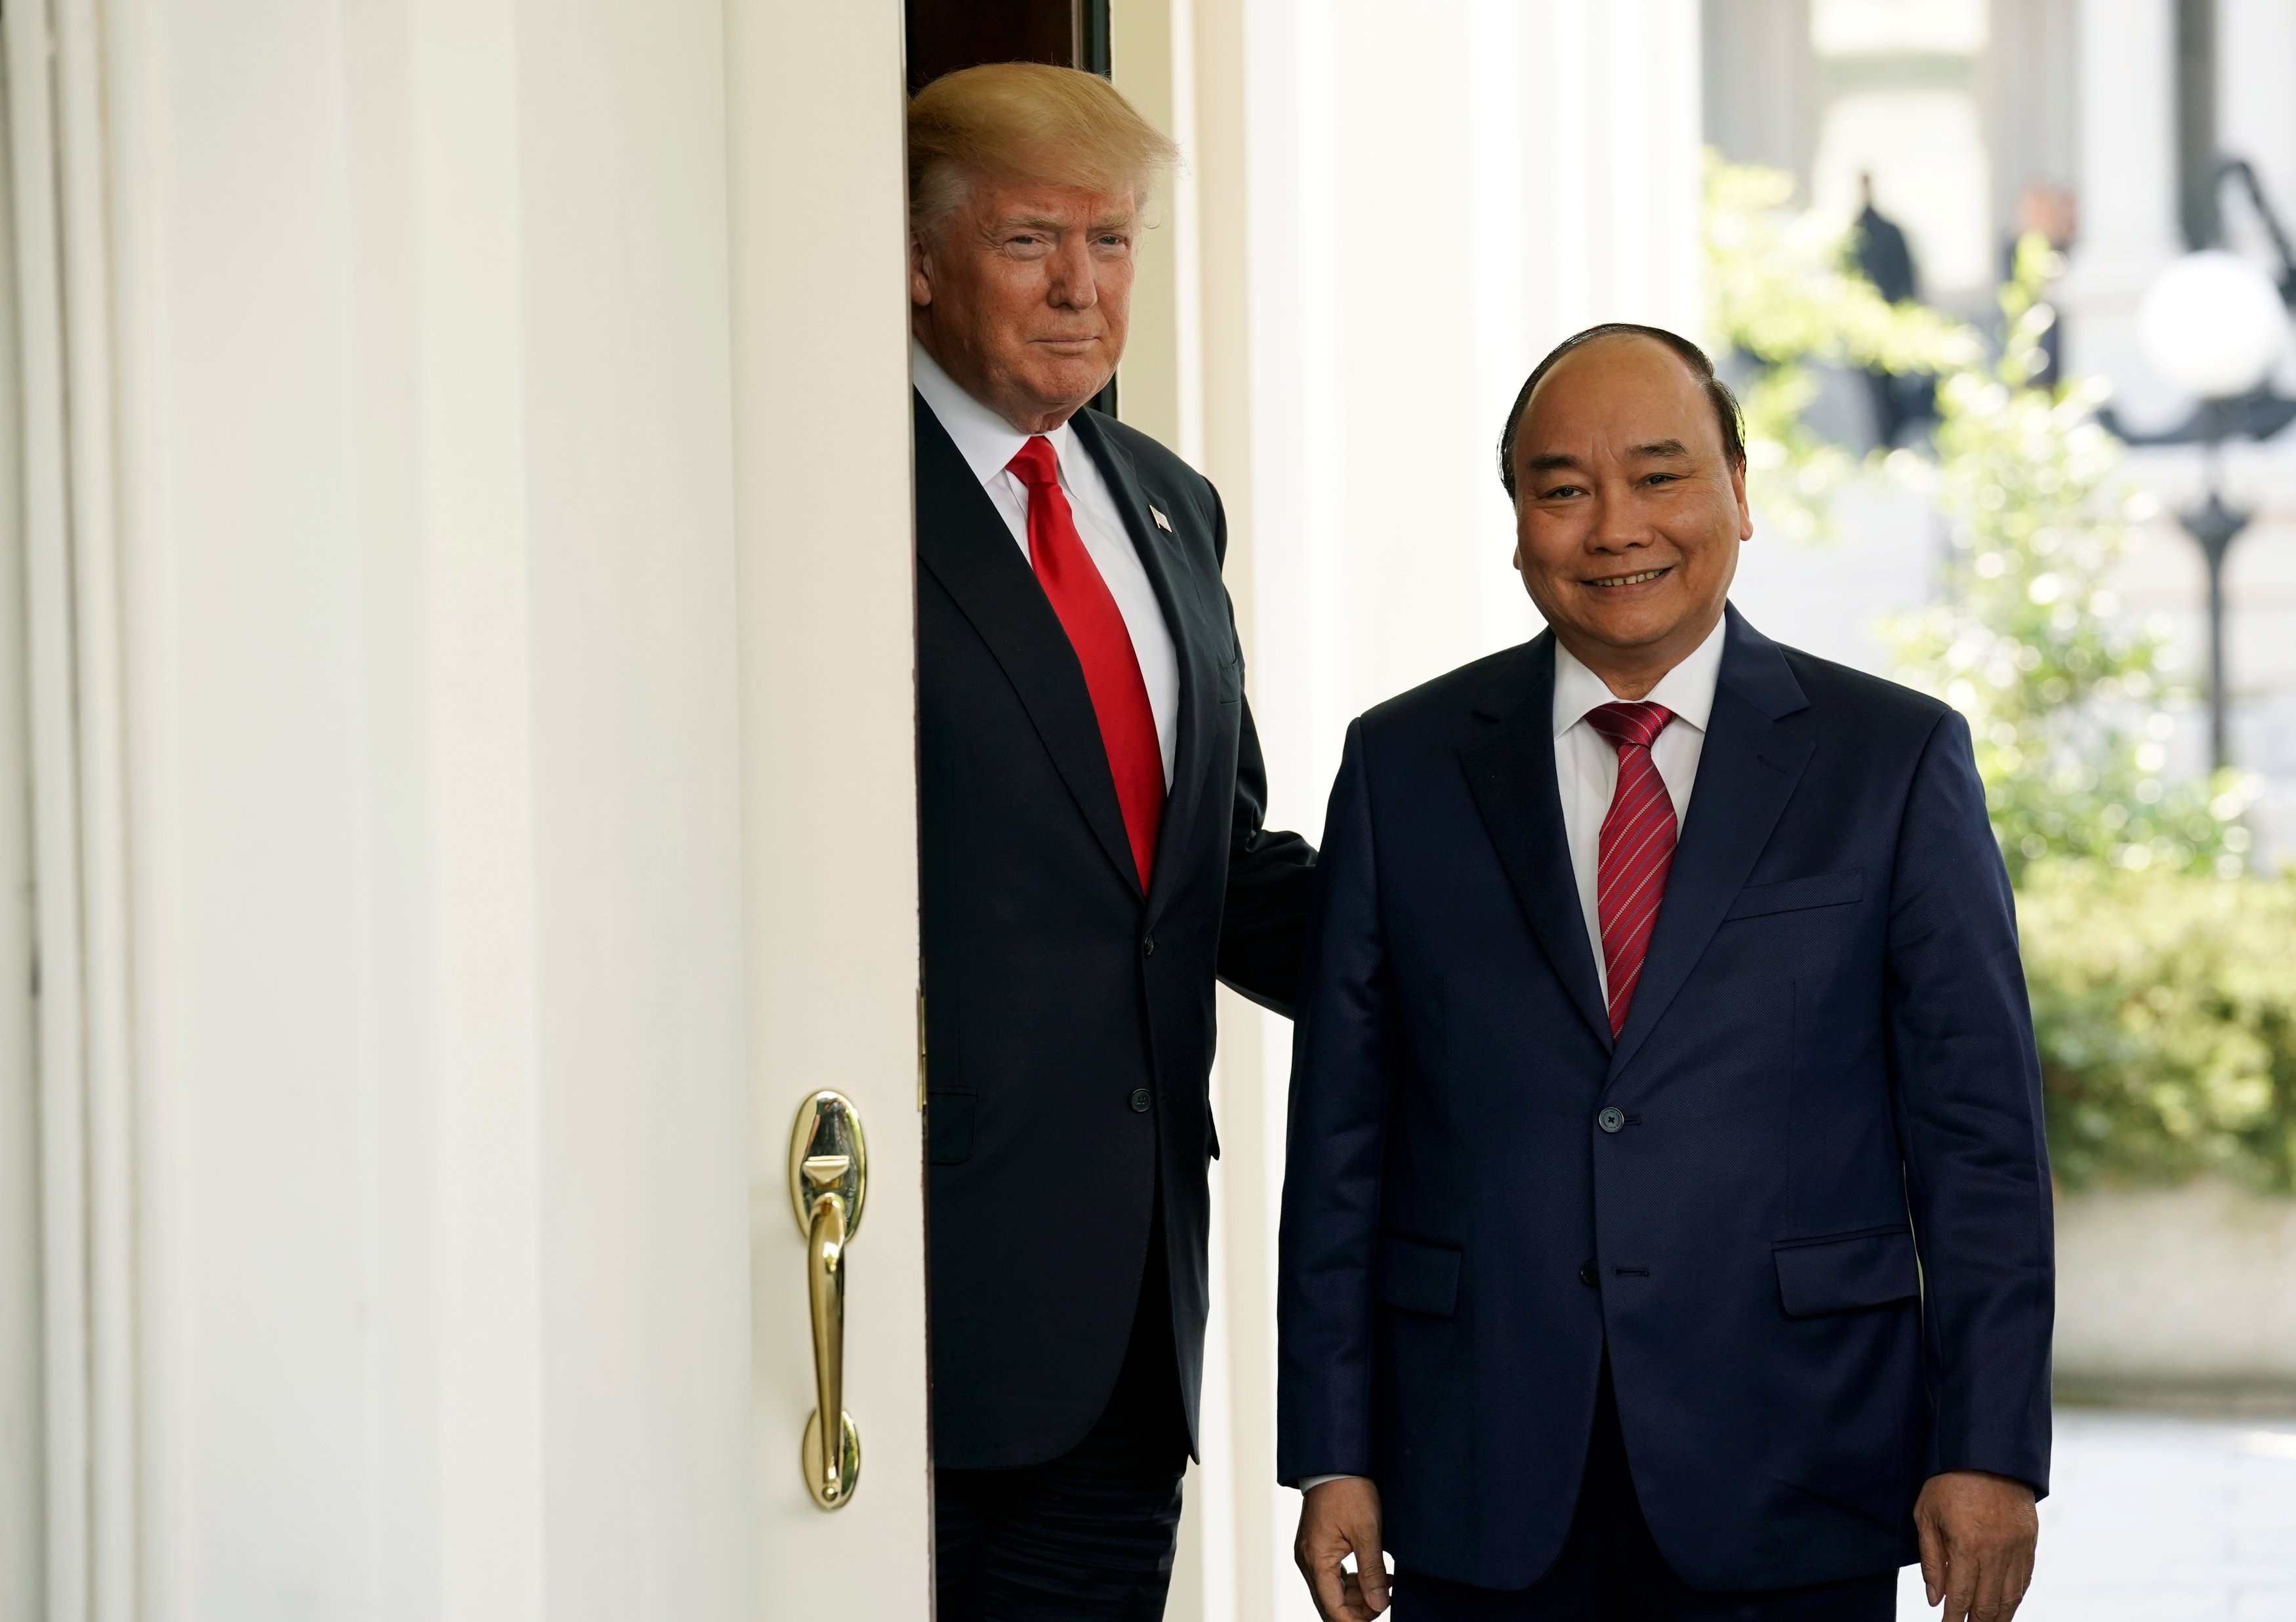 US President Donald Trump welcomes Vietnamese Prime Minister Nguyen Xuan Phuc to the White House. Photo: Reuters